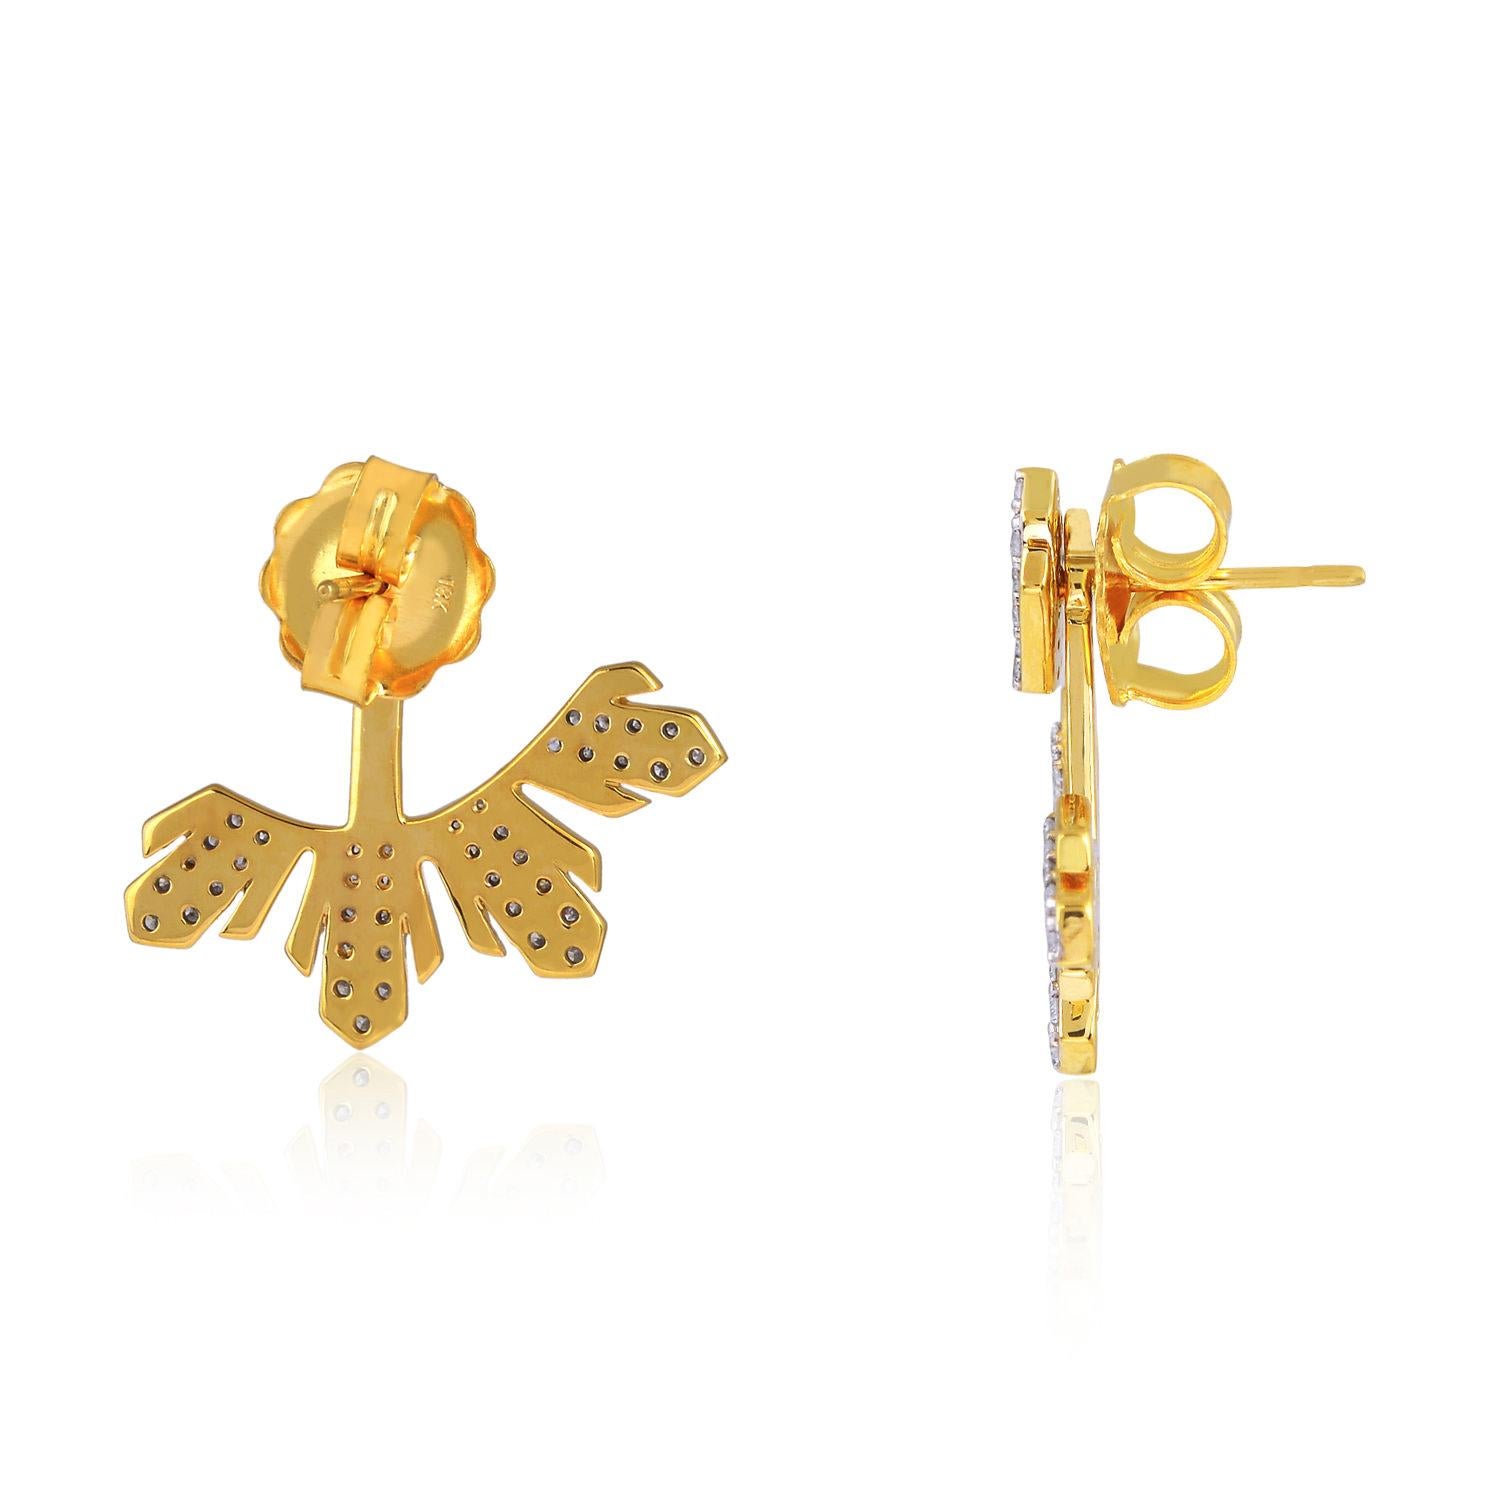 Cast from 18-karat gold, these ear jacket earrings are hand set with 1.04 carats of sparkling diamonds. 

FOLLOW  MEGHNA JEWELS storefront to view the latest collection & exclusive pieces.  Meghna Jewels is proudly rated as a Top Seller on 1stdibs